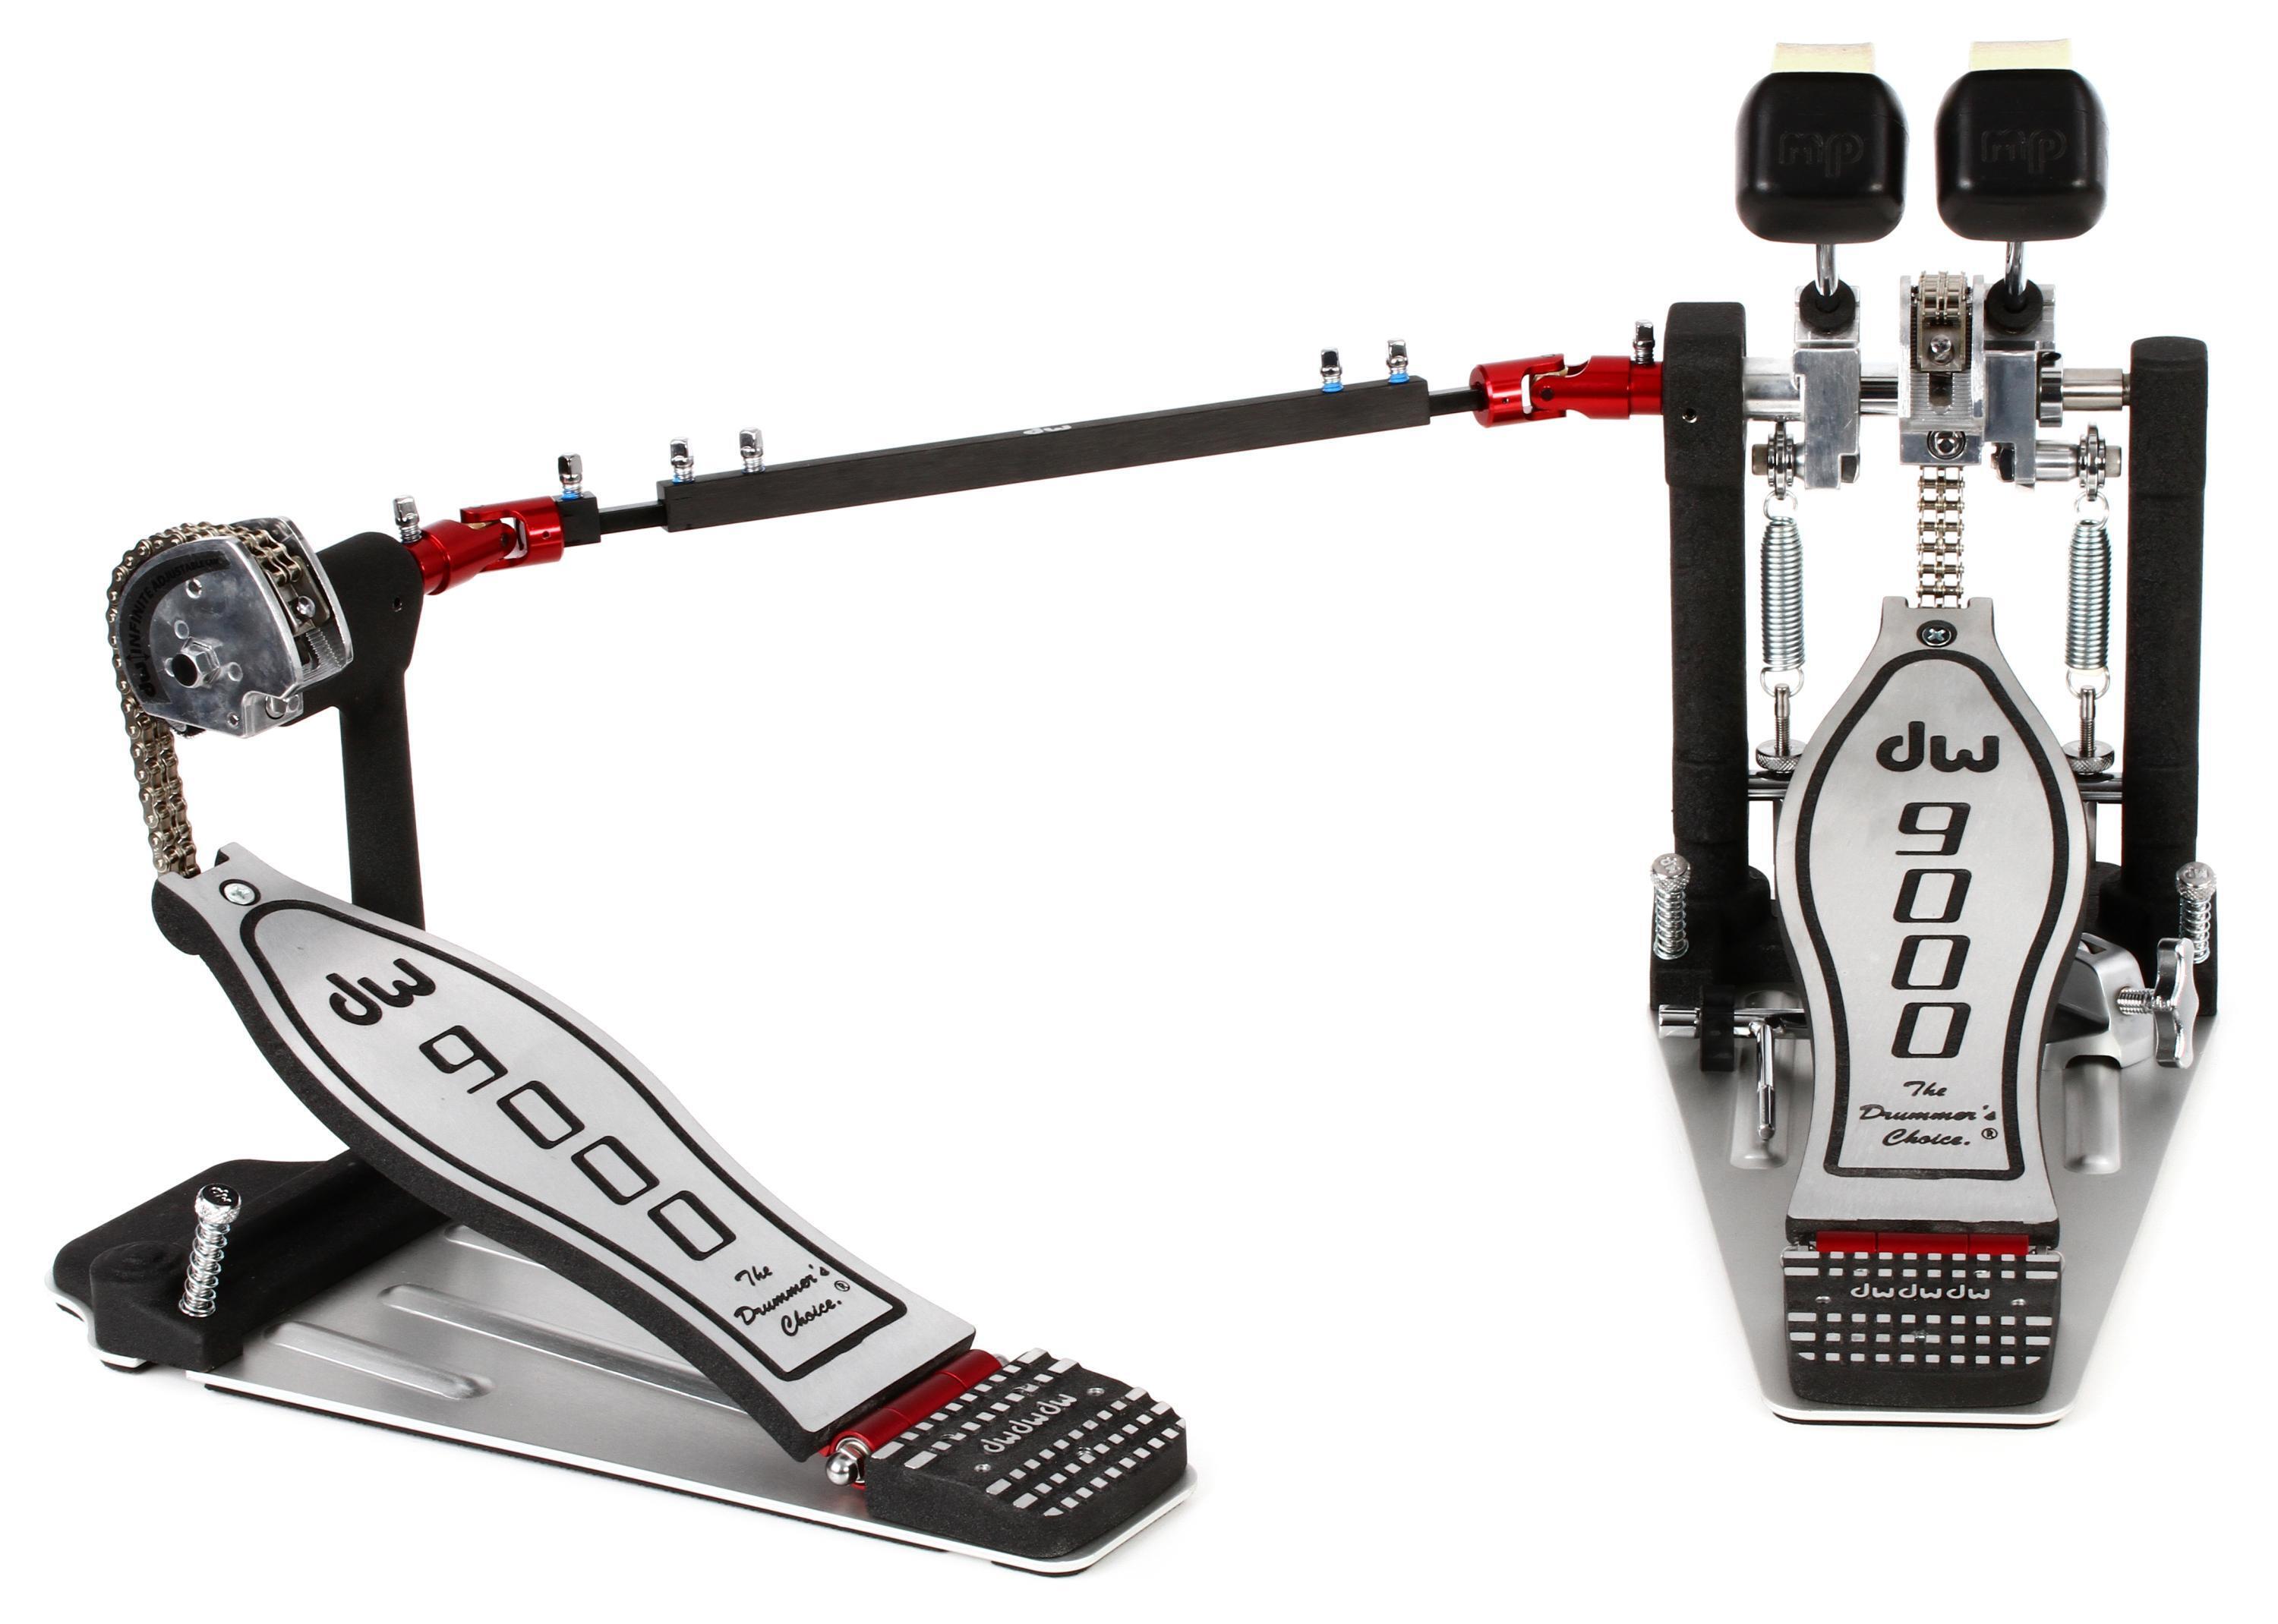 DW DWCP9002 9000 Series Double Bass Drum Pedal | Sweetwater